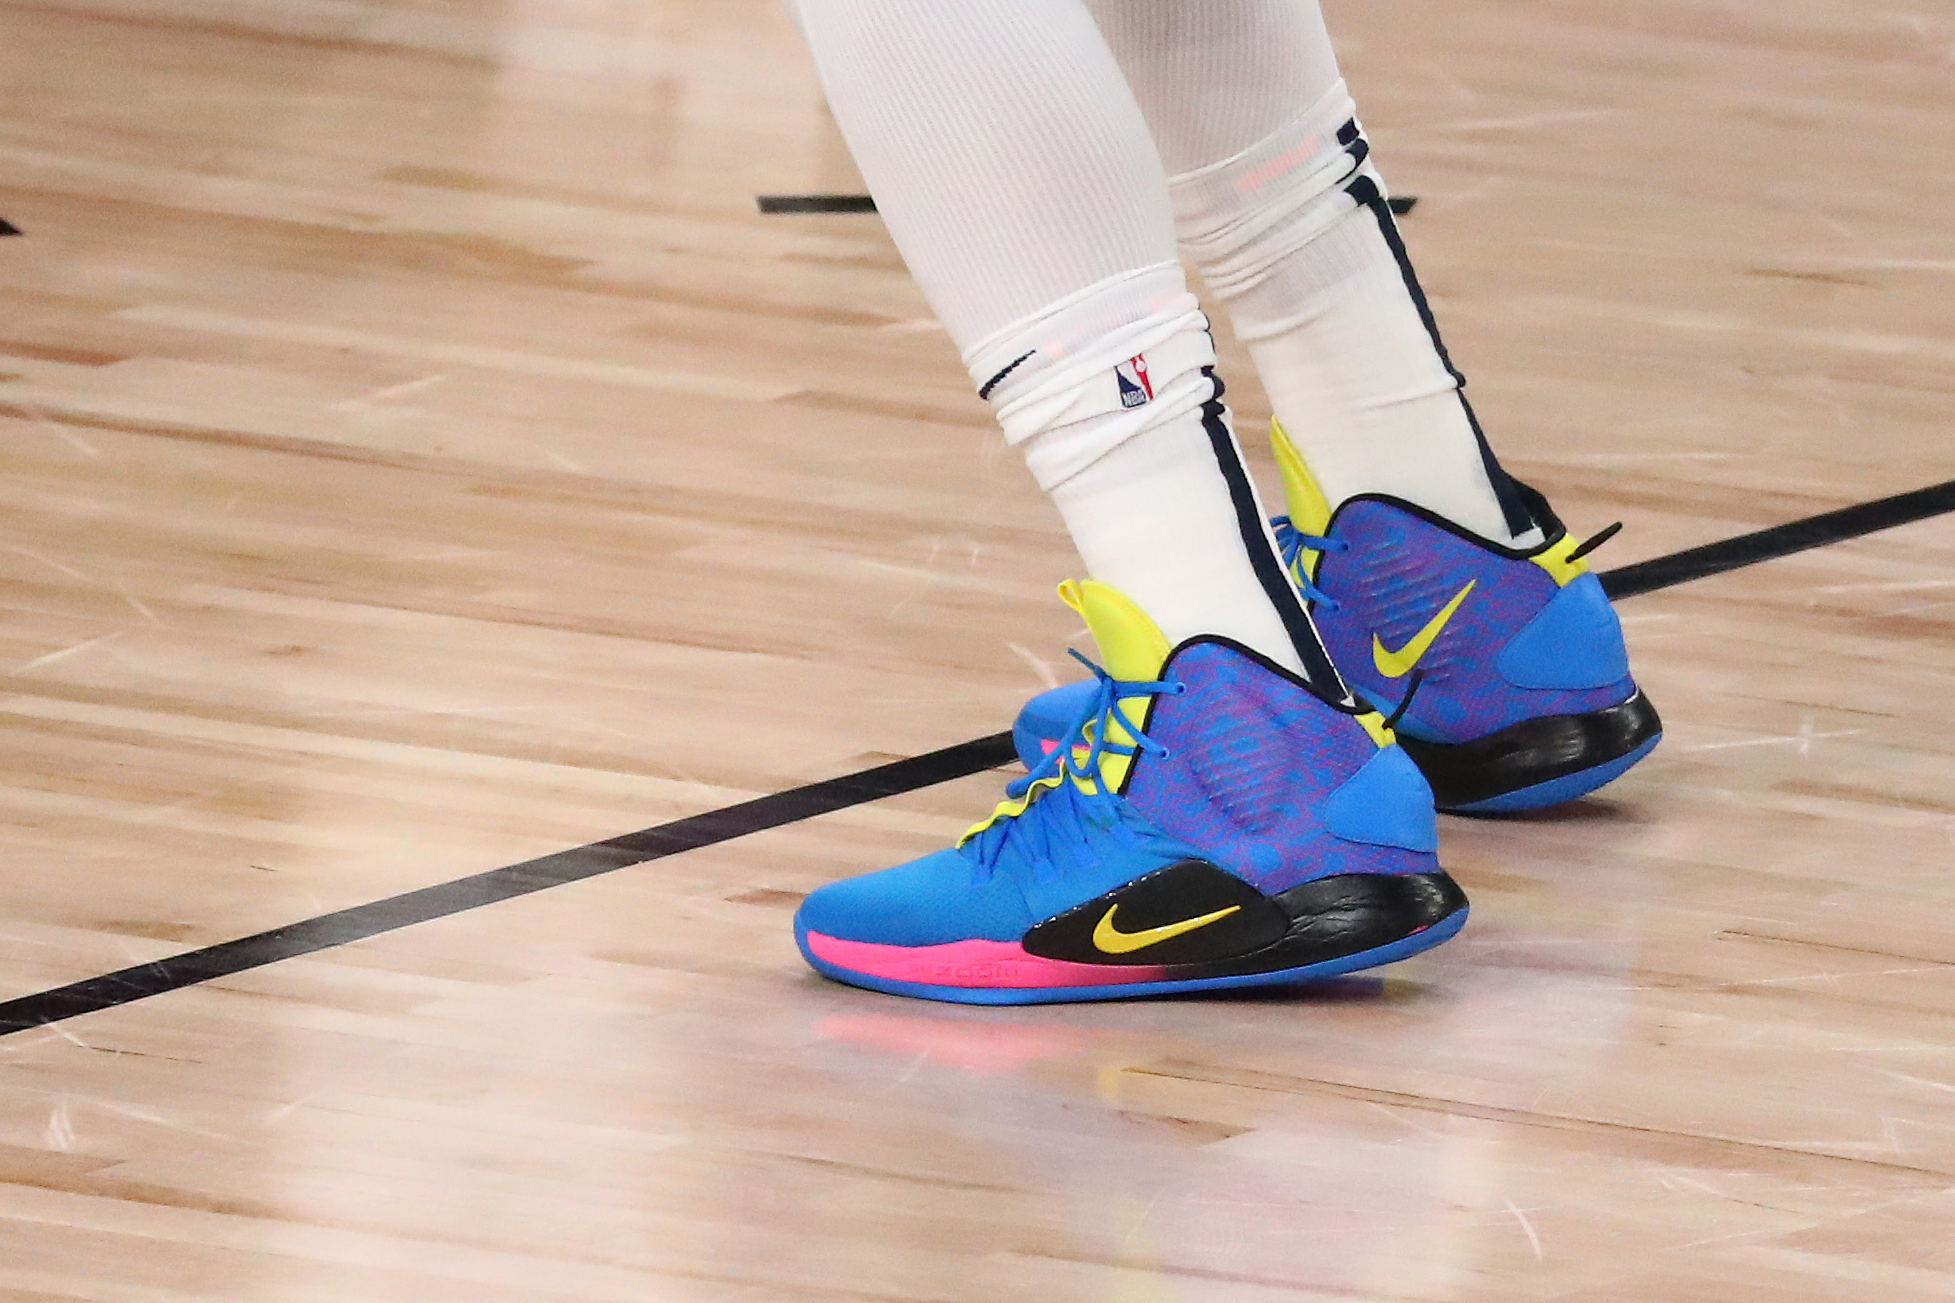 What basketball shoes do NBA players wear? | The Sports Daily